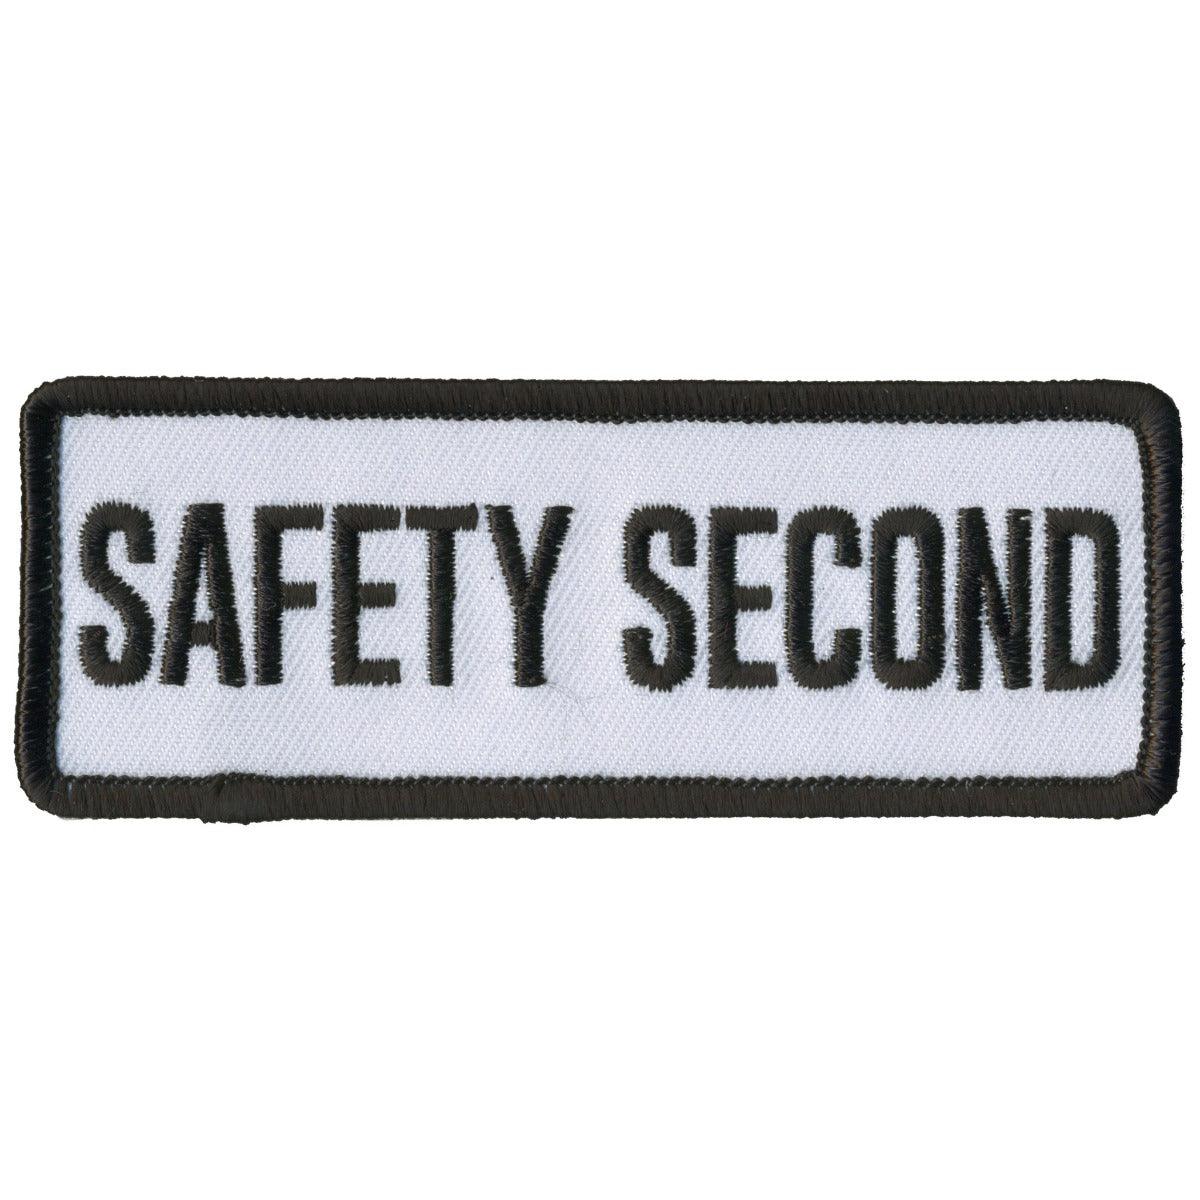 Hot Leathers Safety Second Patch - American Legend Rider